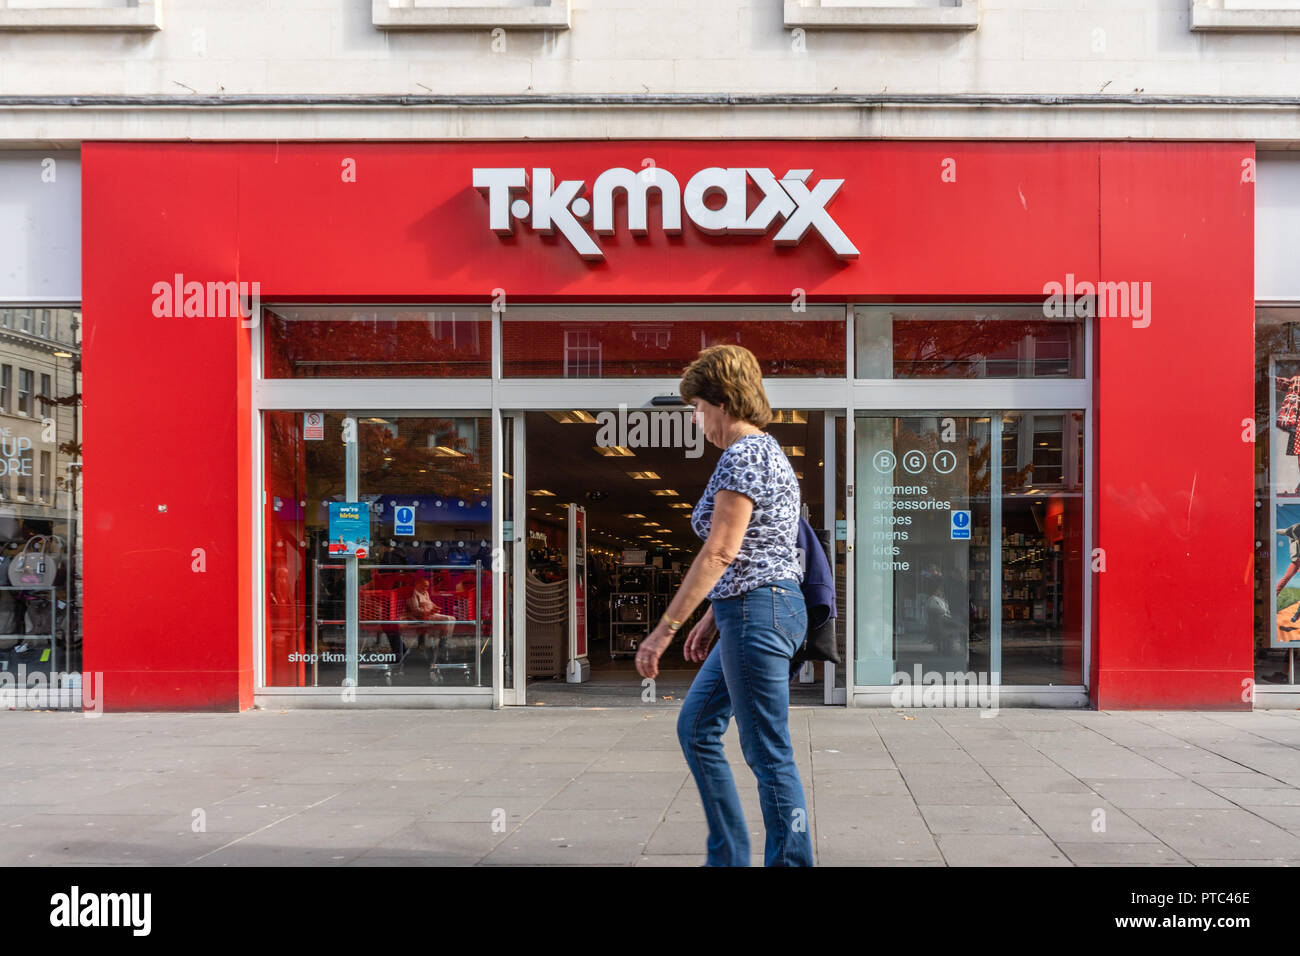 A woman walking past a TK MAXX store front in Southern England, UK, Europe Stock Photo